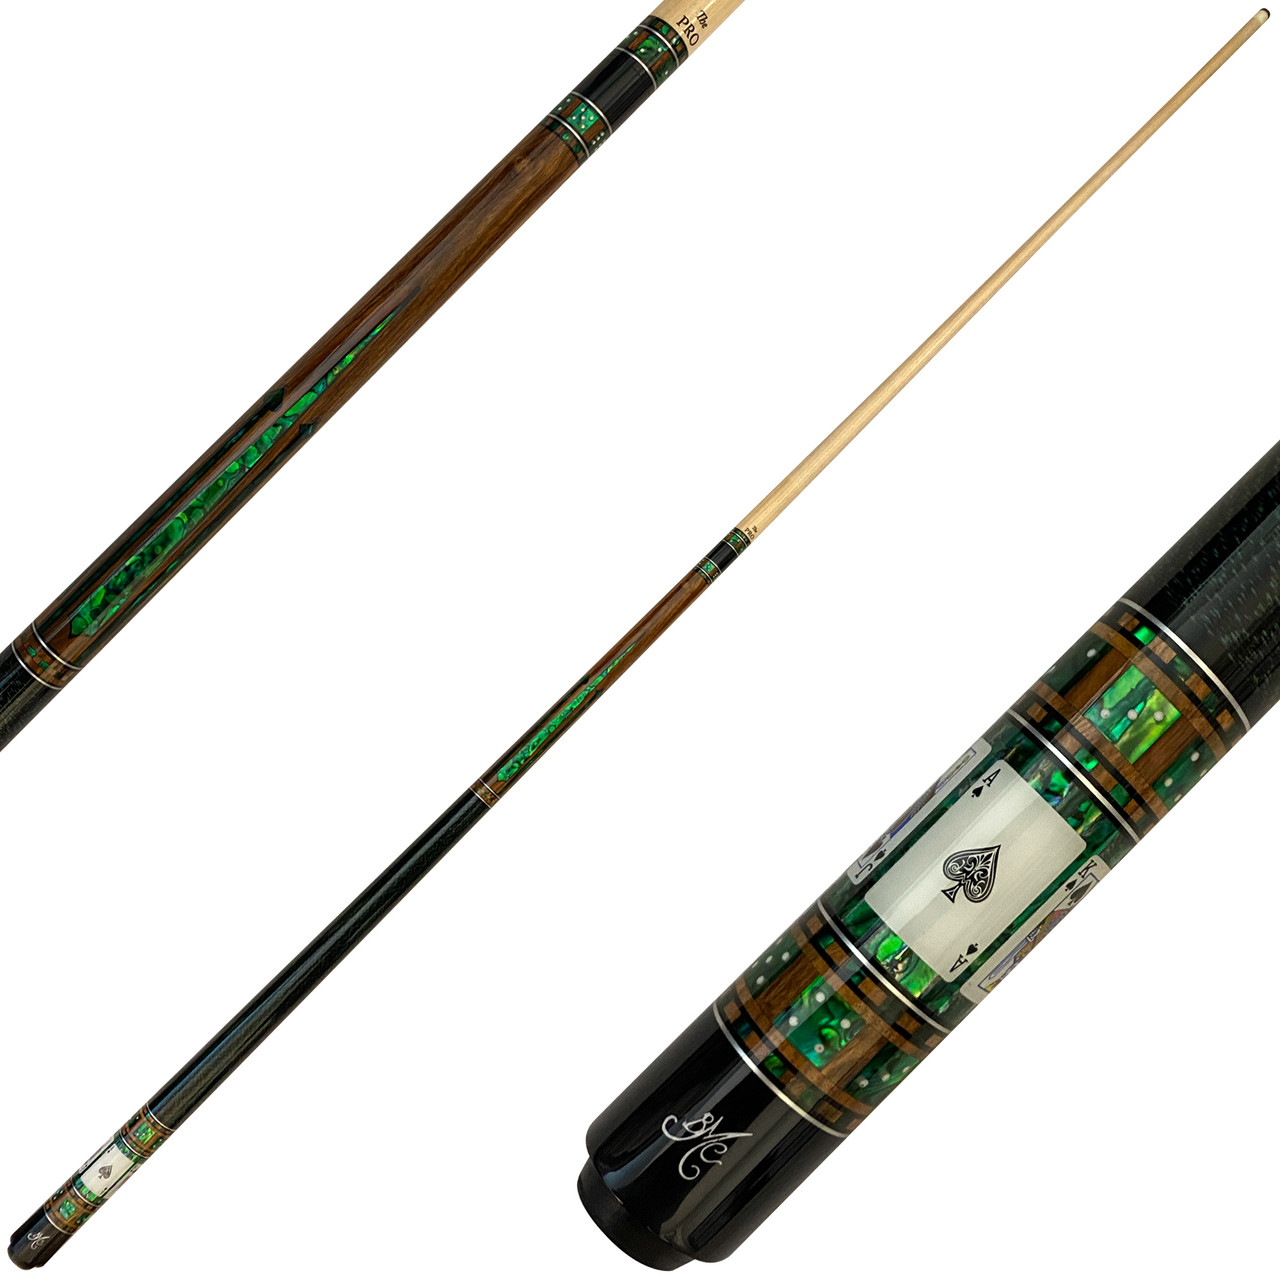 Meucci Casino Pool Cue 7 - Signed & Dated Edition